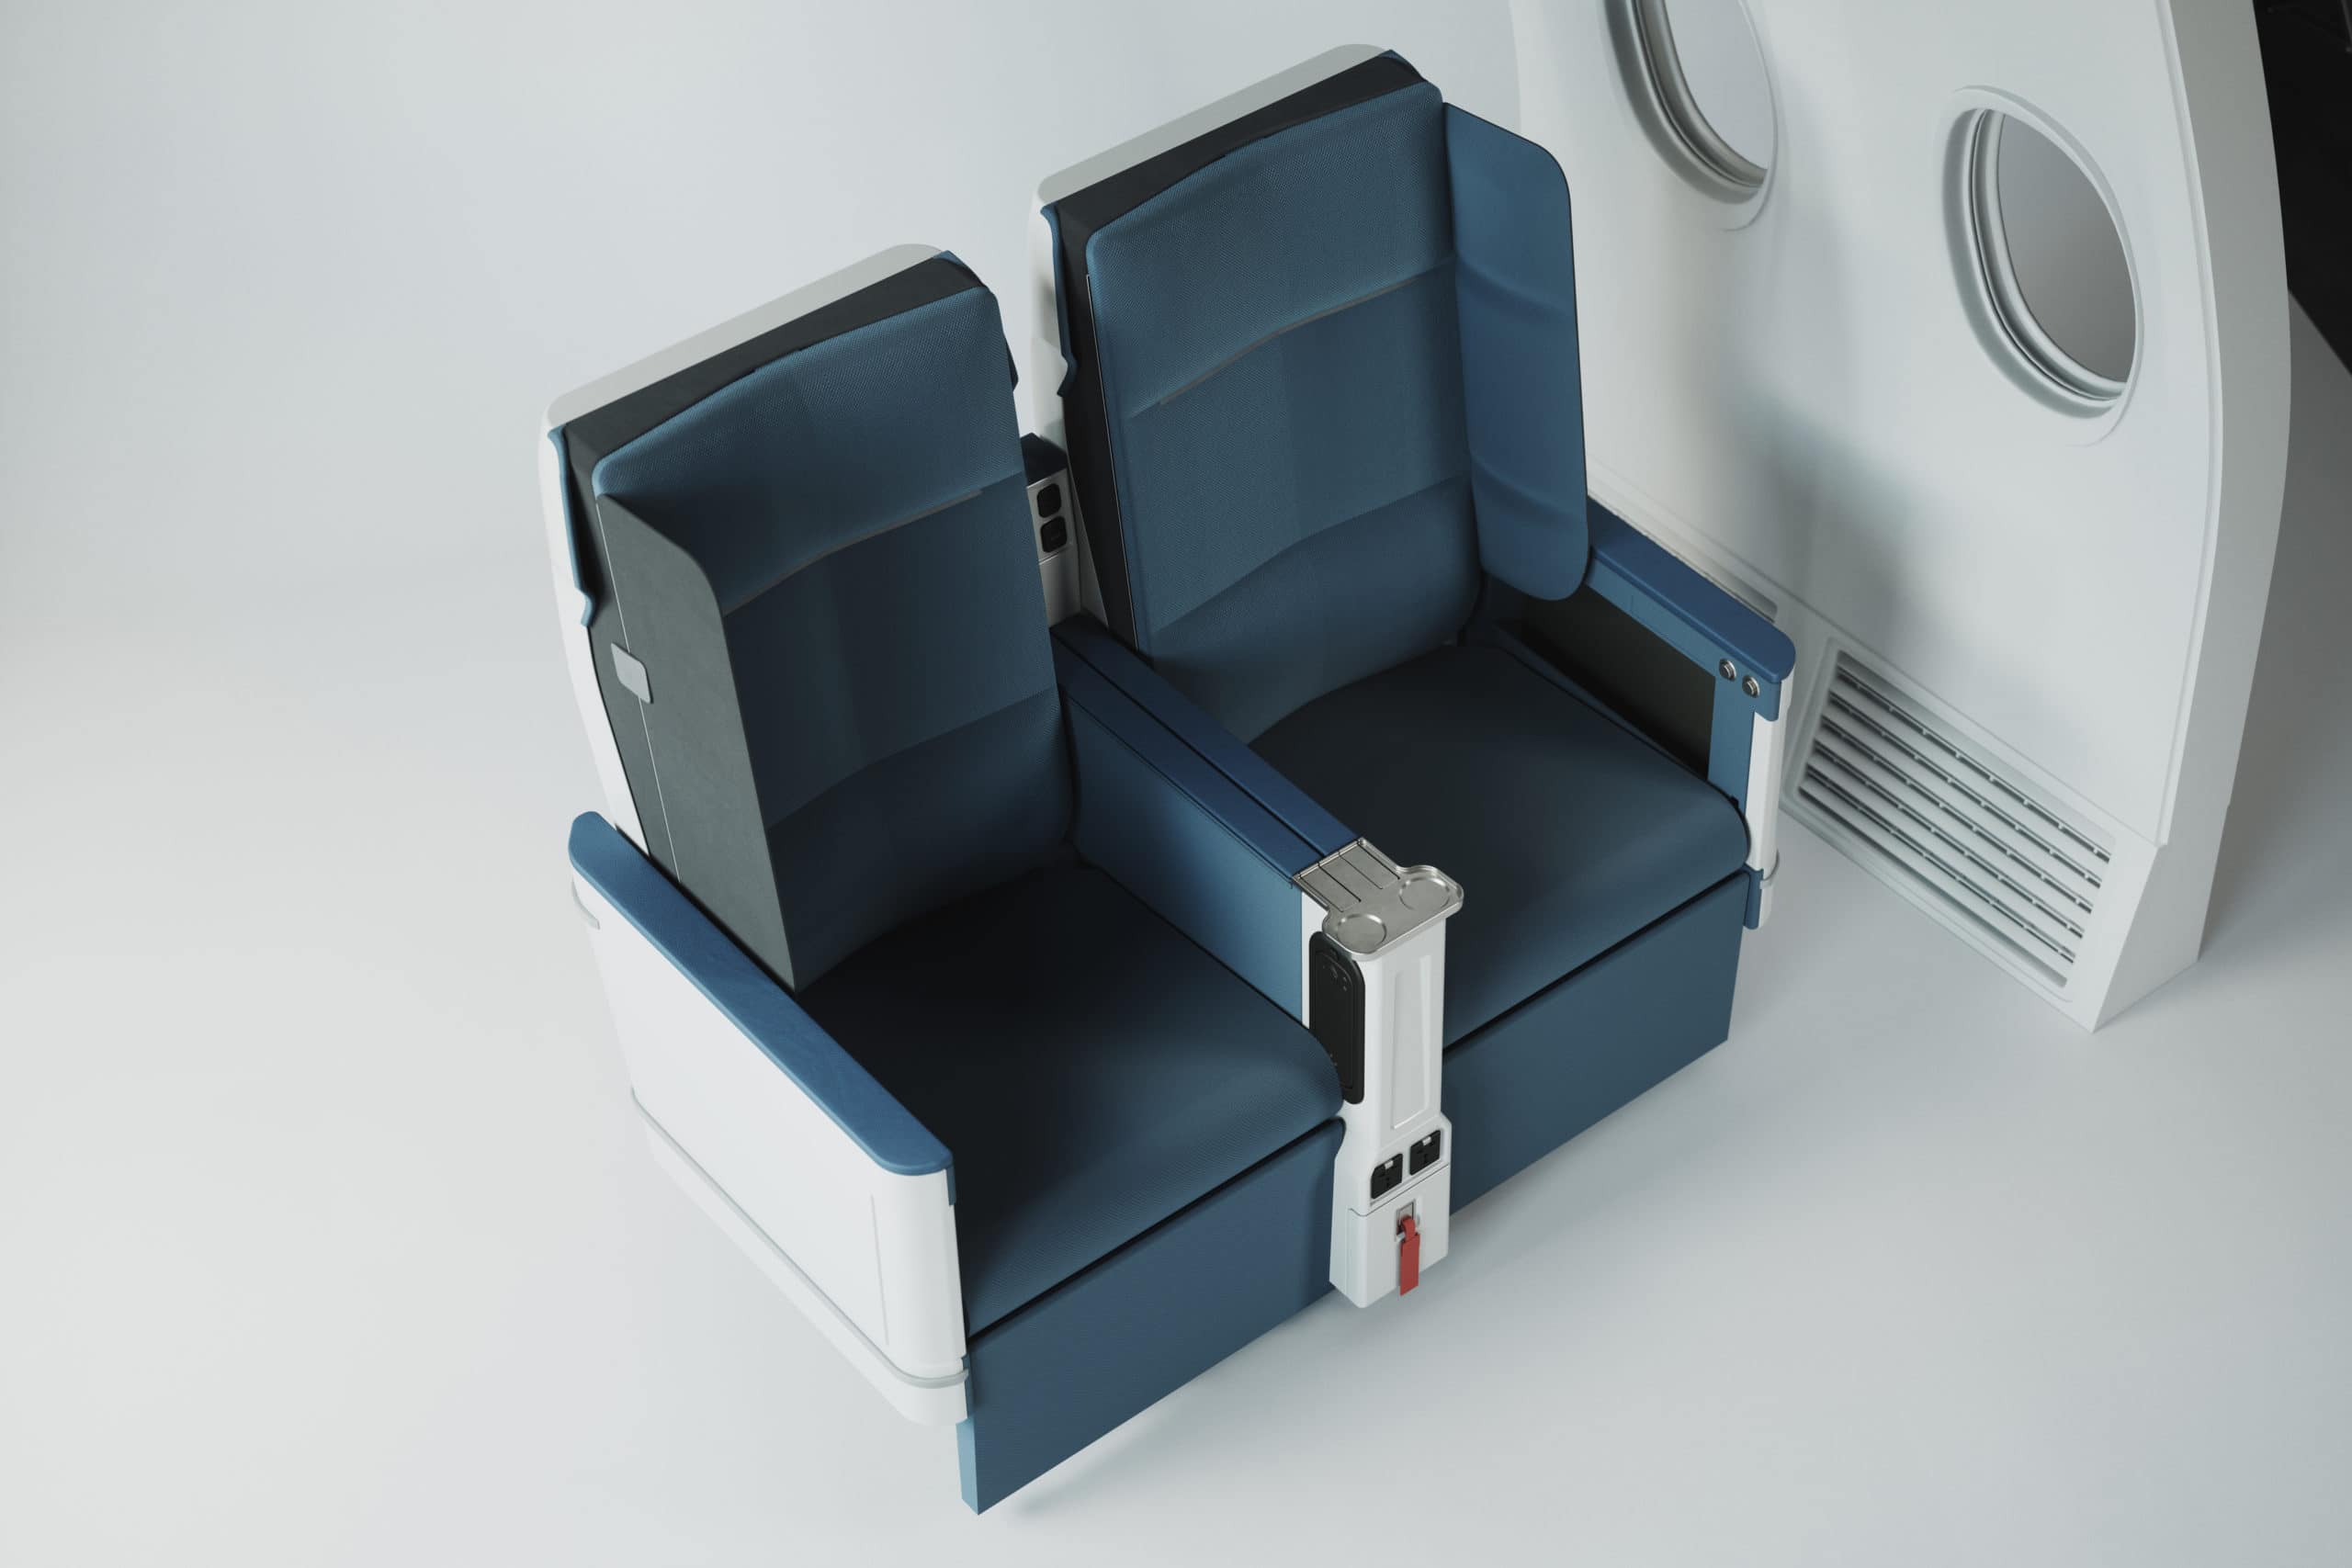 The outer wings of the Interspace seat design can be folded out to create a private bay for two people traveling together.